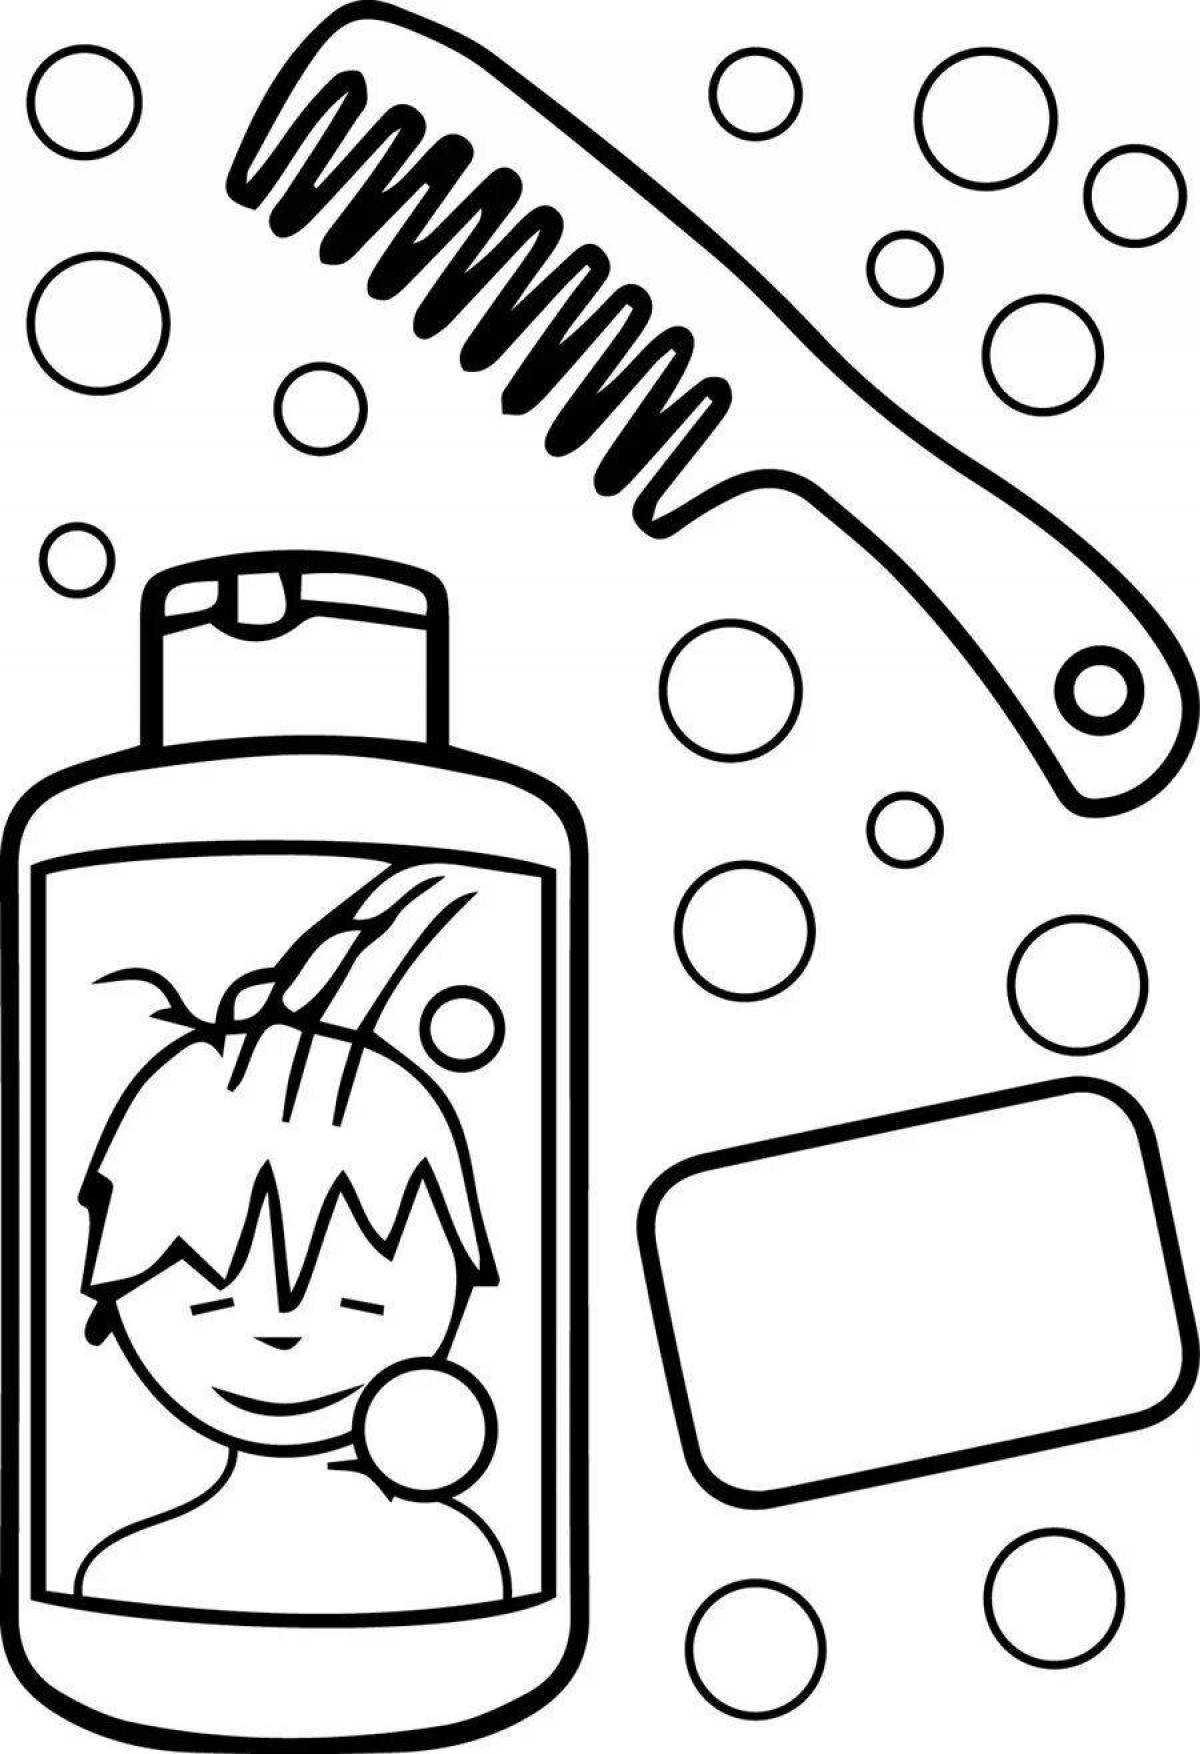 Exciting hygiene coloring pages